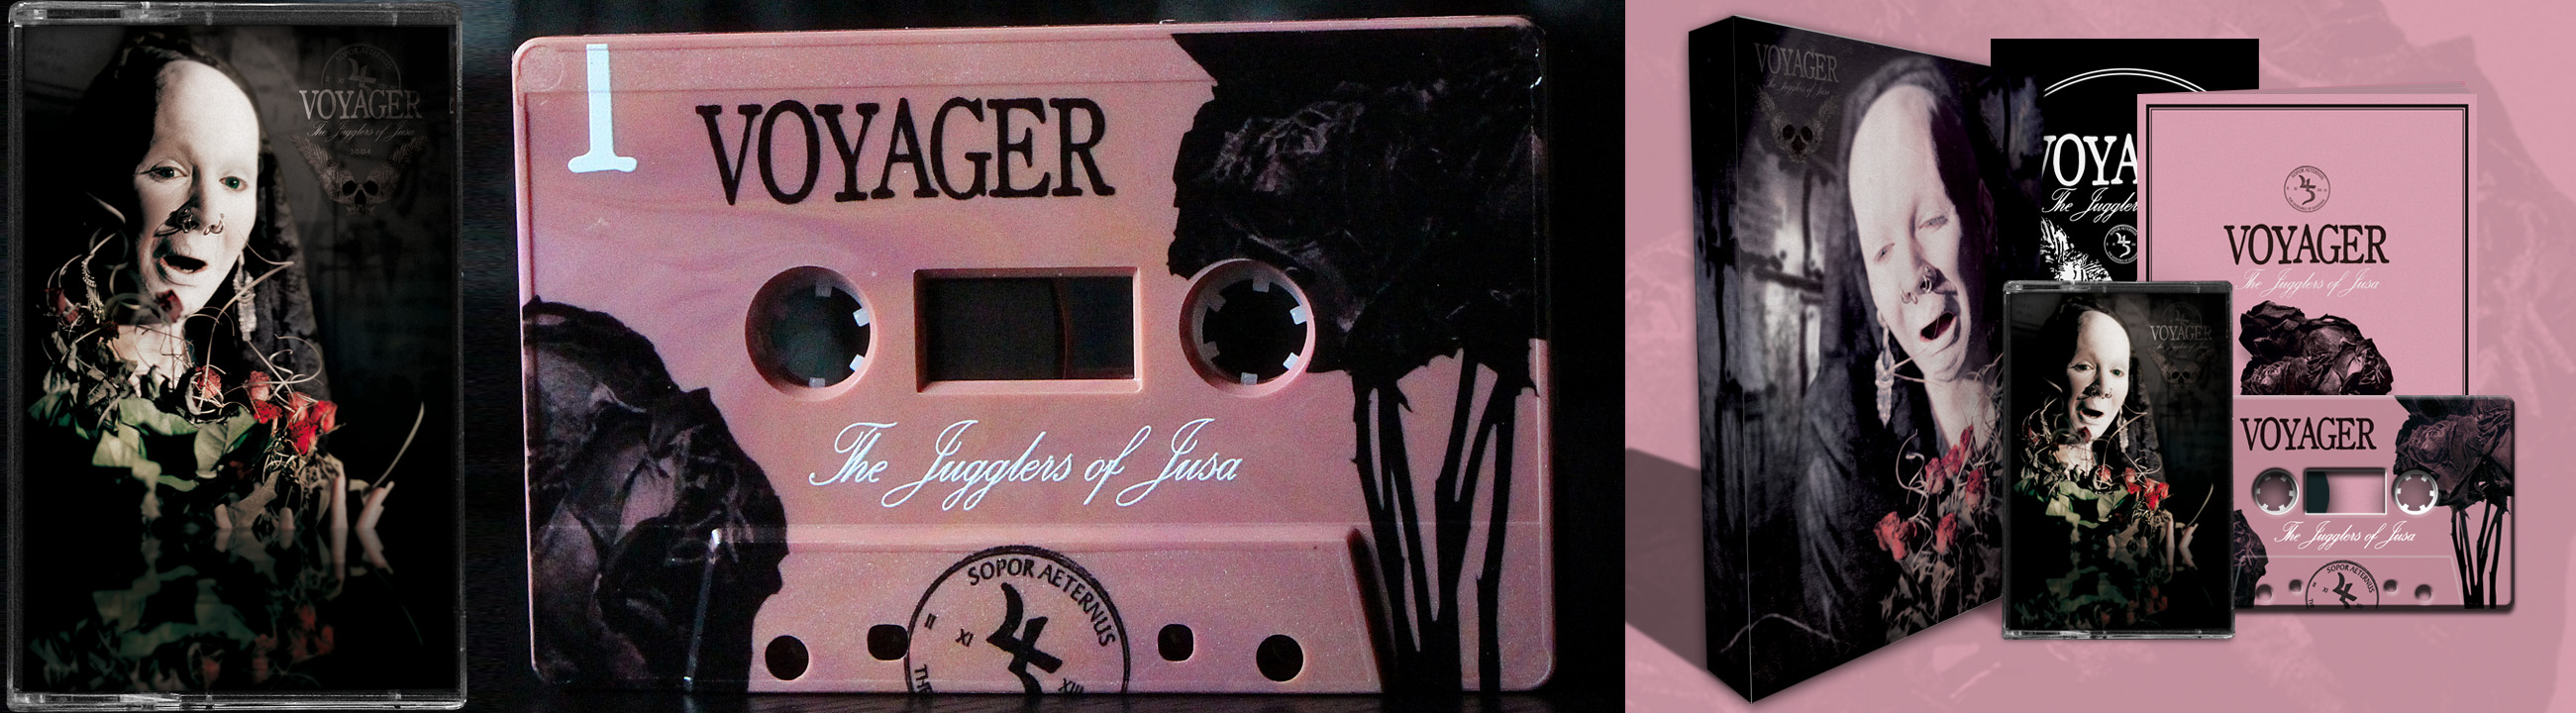 VOYAGER_Tape